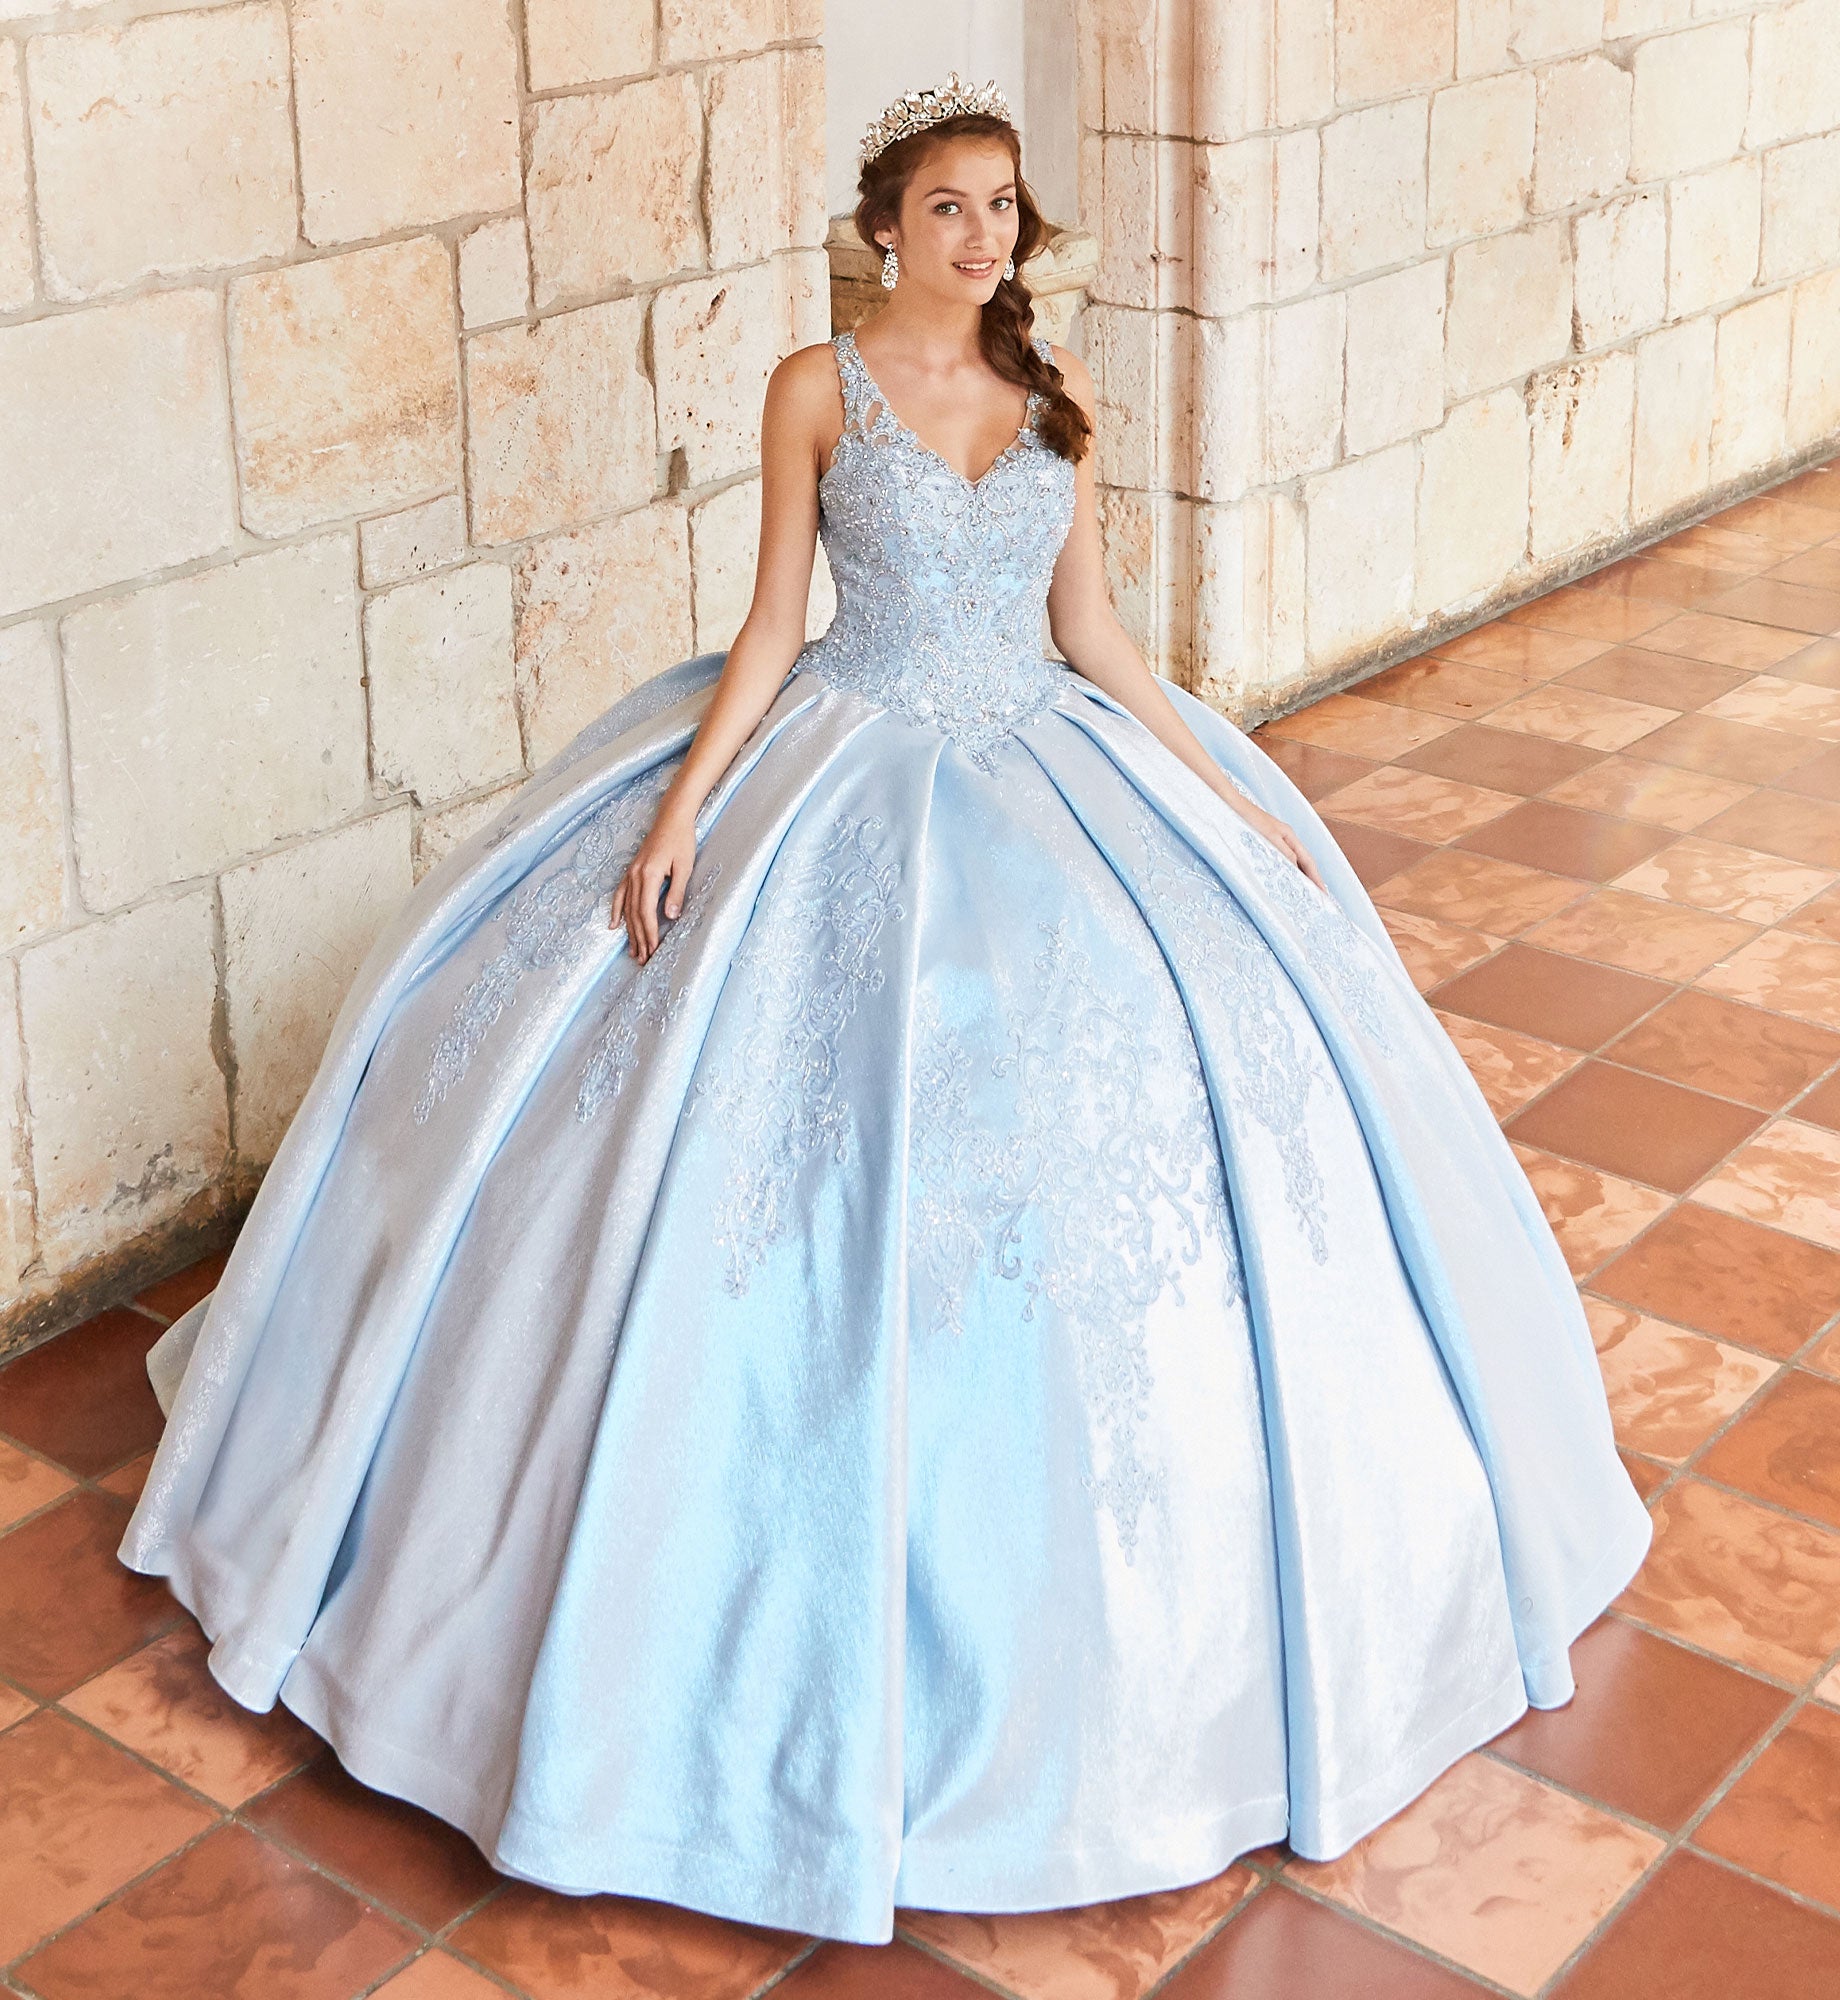 Classic quinceanera dress with shimmery mikado and lace appliques